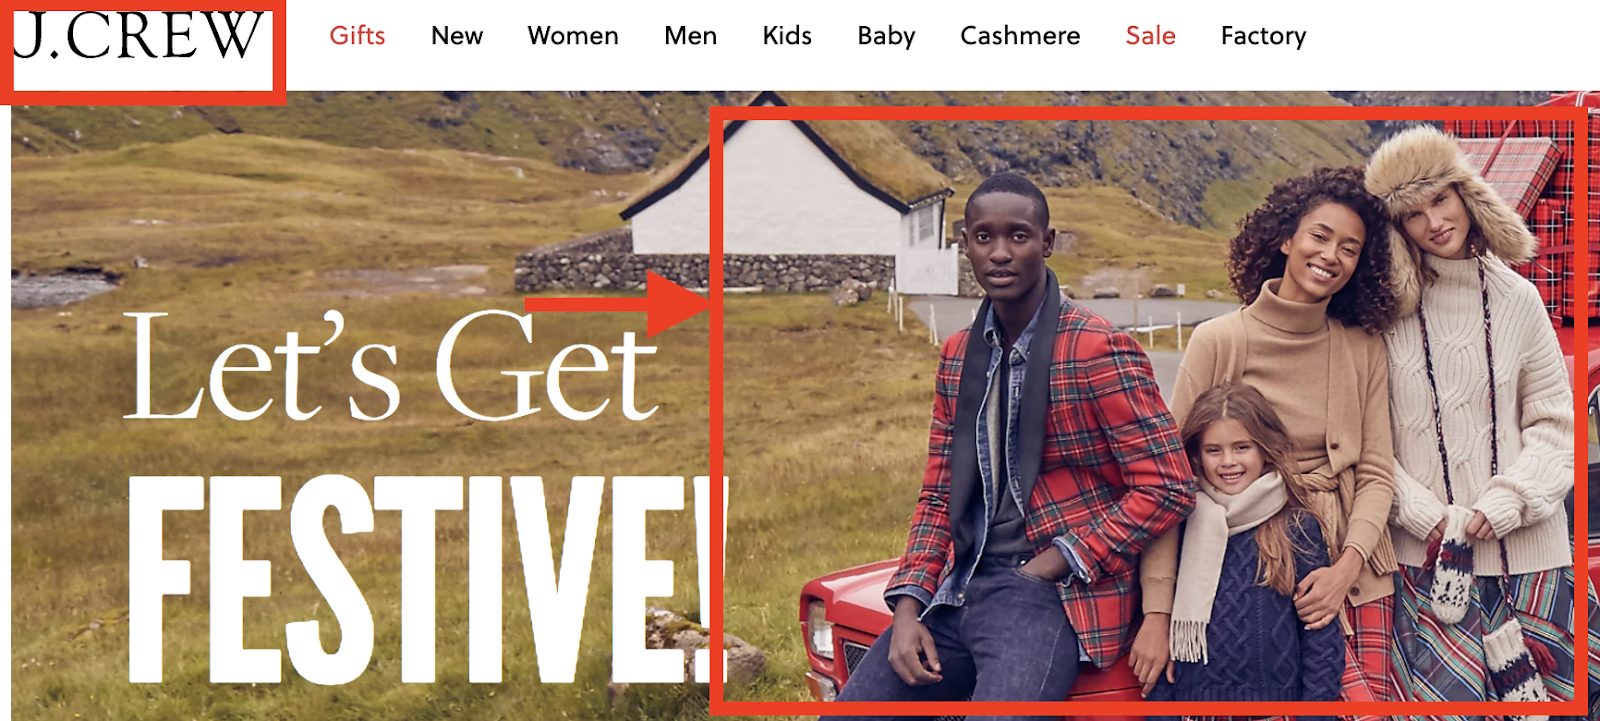 j crew home page